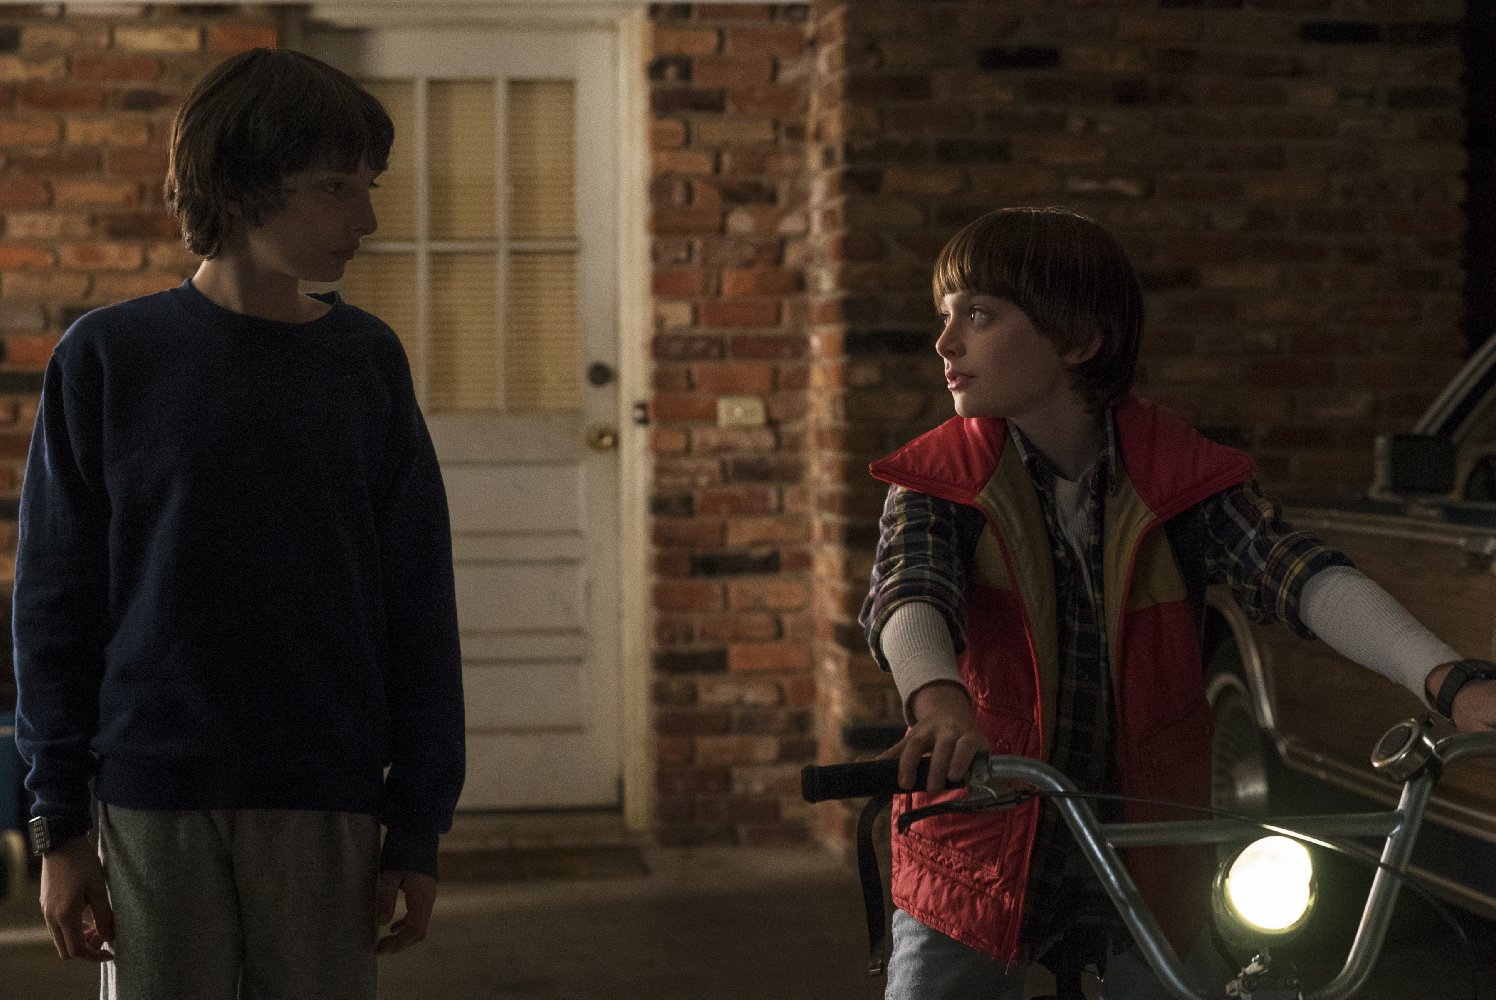 Only “Stranger Things” Experts Can Match These Quotes to the Correct Characters Will Byers Stranger Things